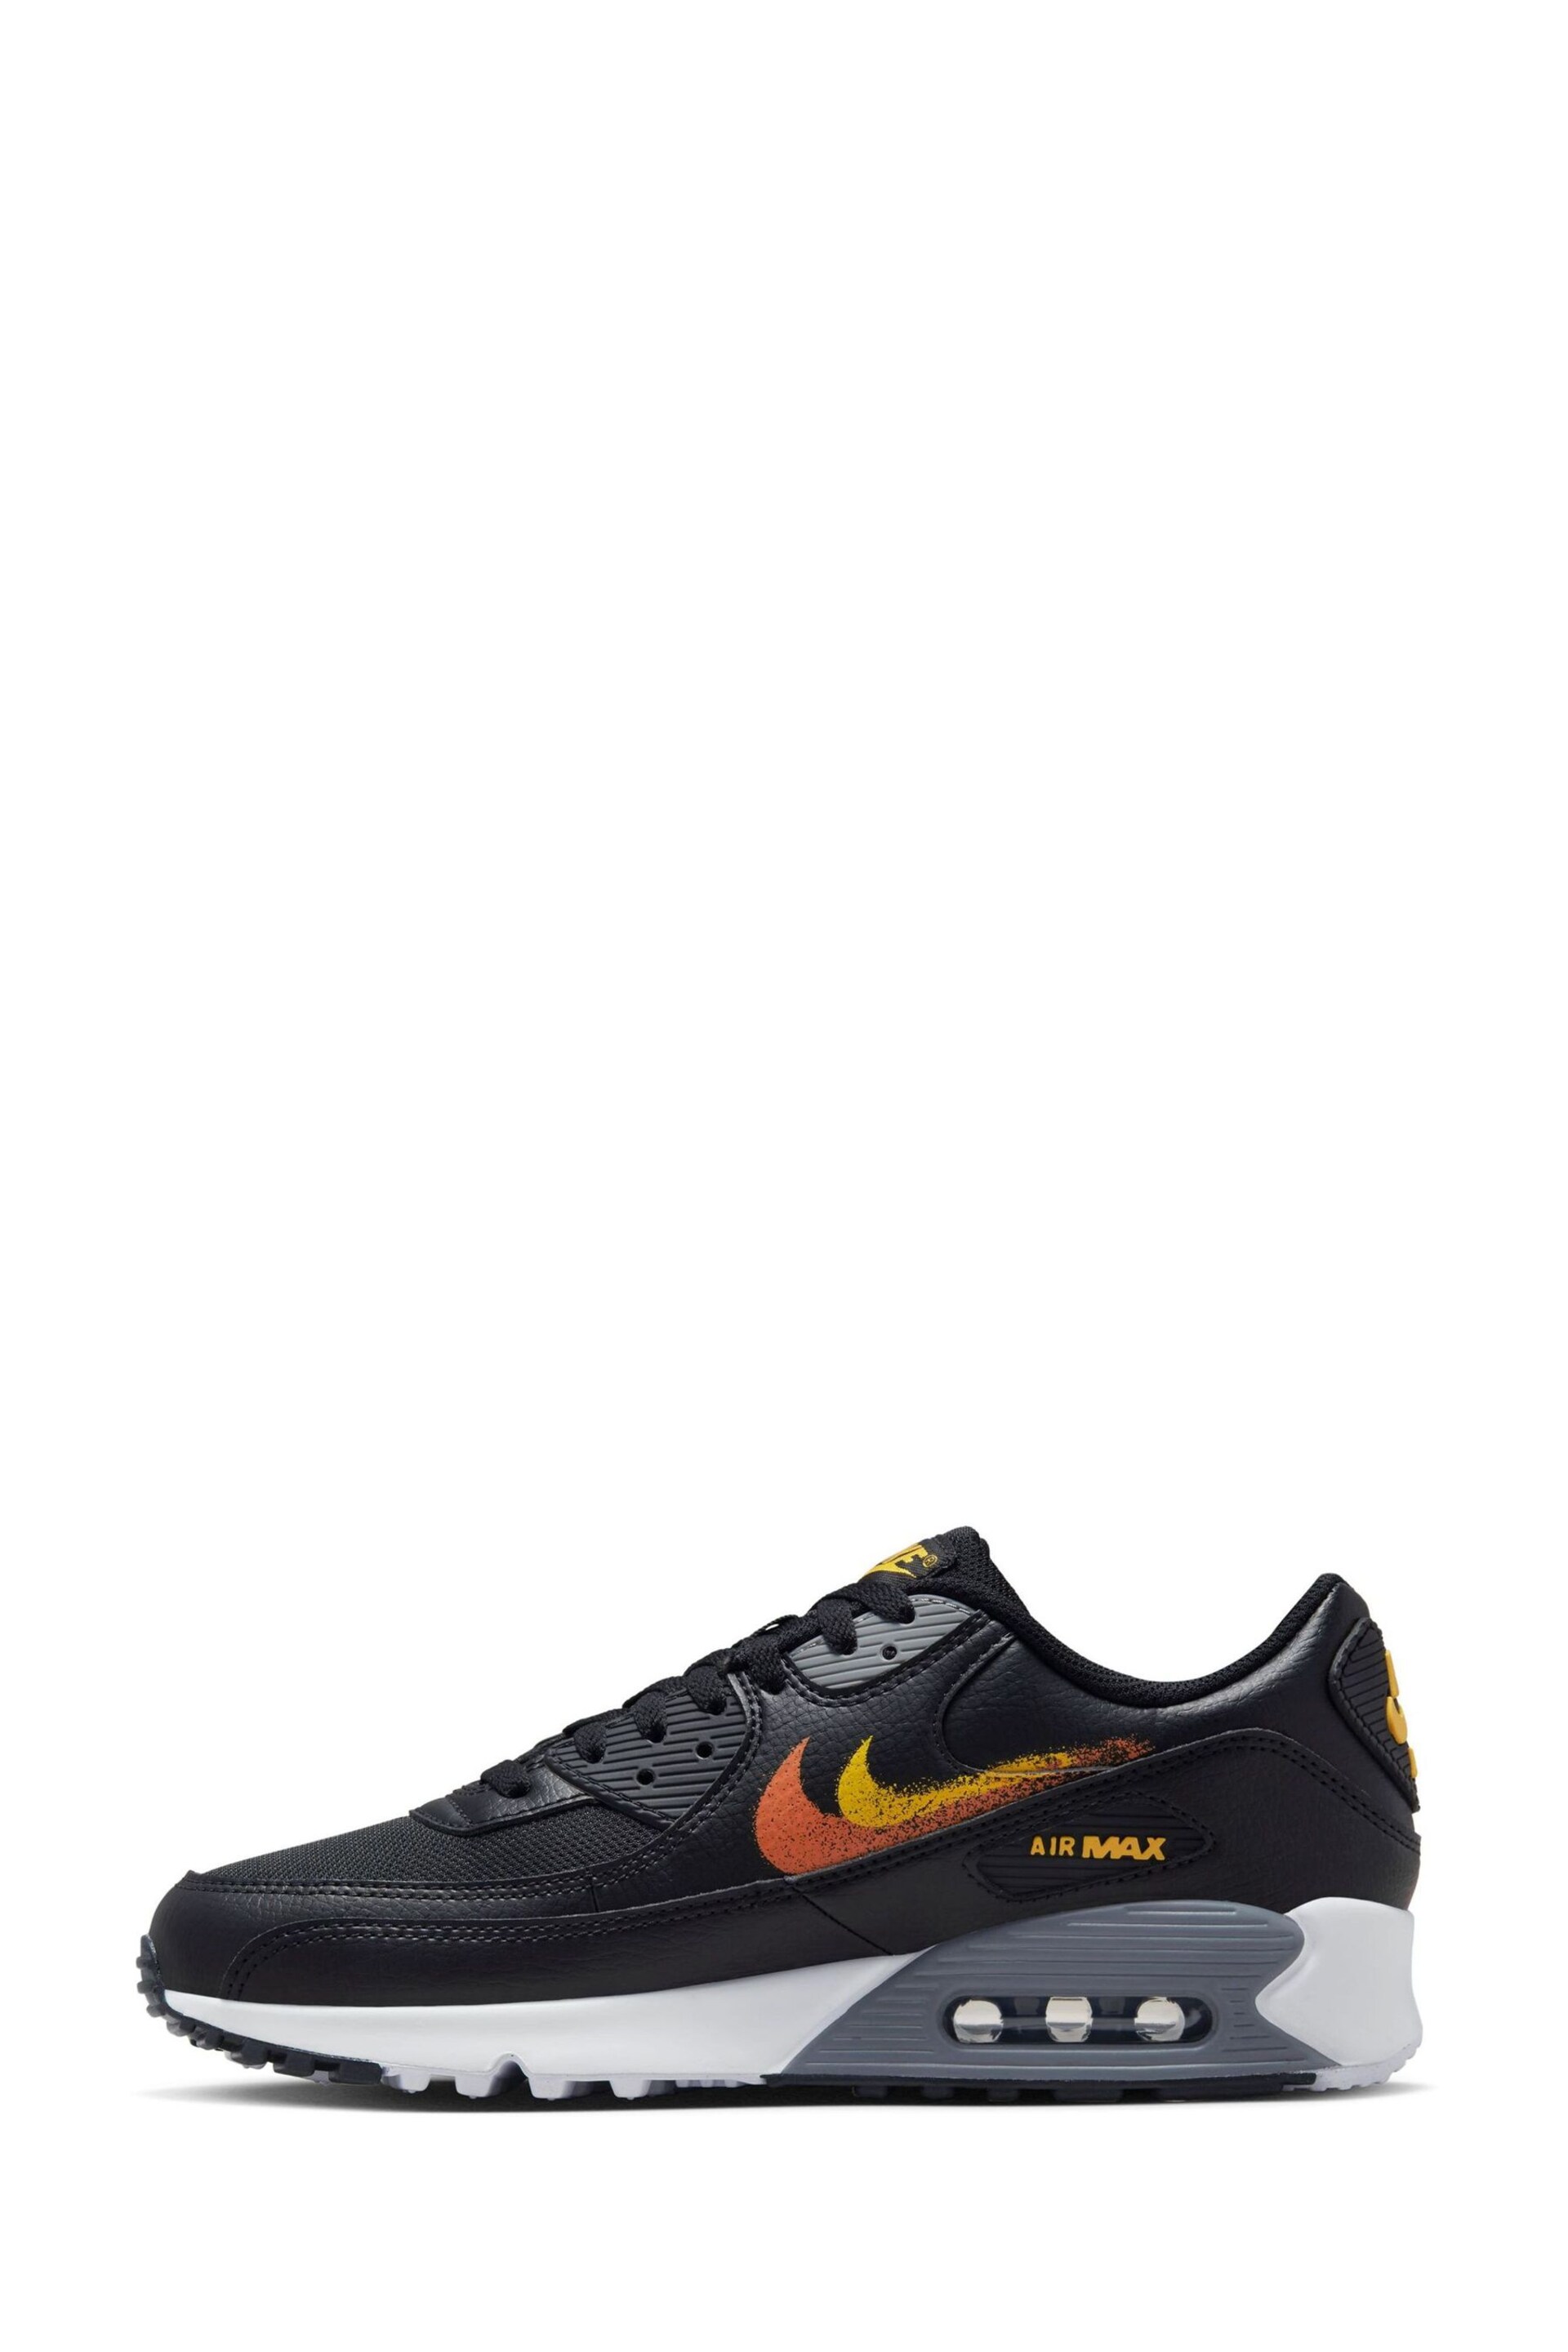 Nike Black/Gold Air Max 90 Trainers - Image 2 of 10